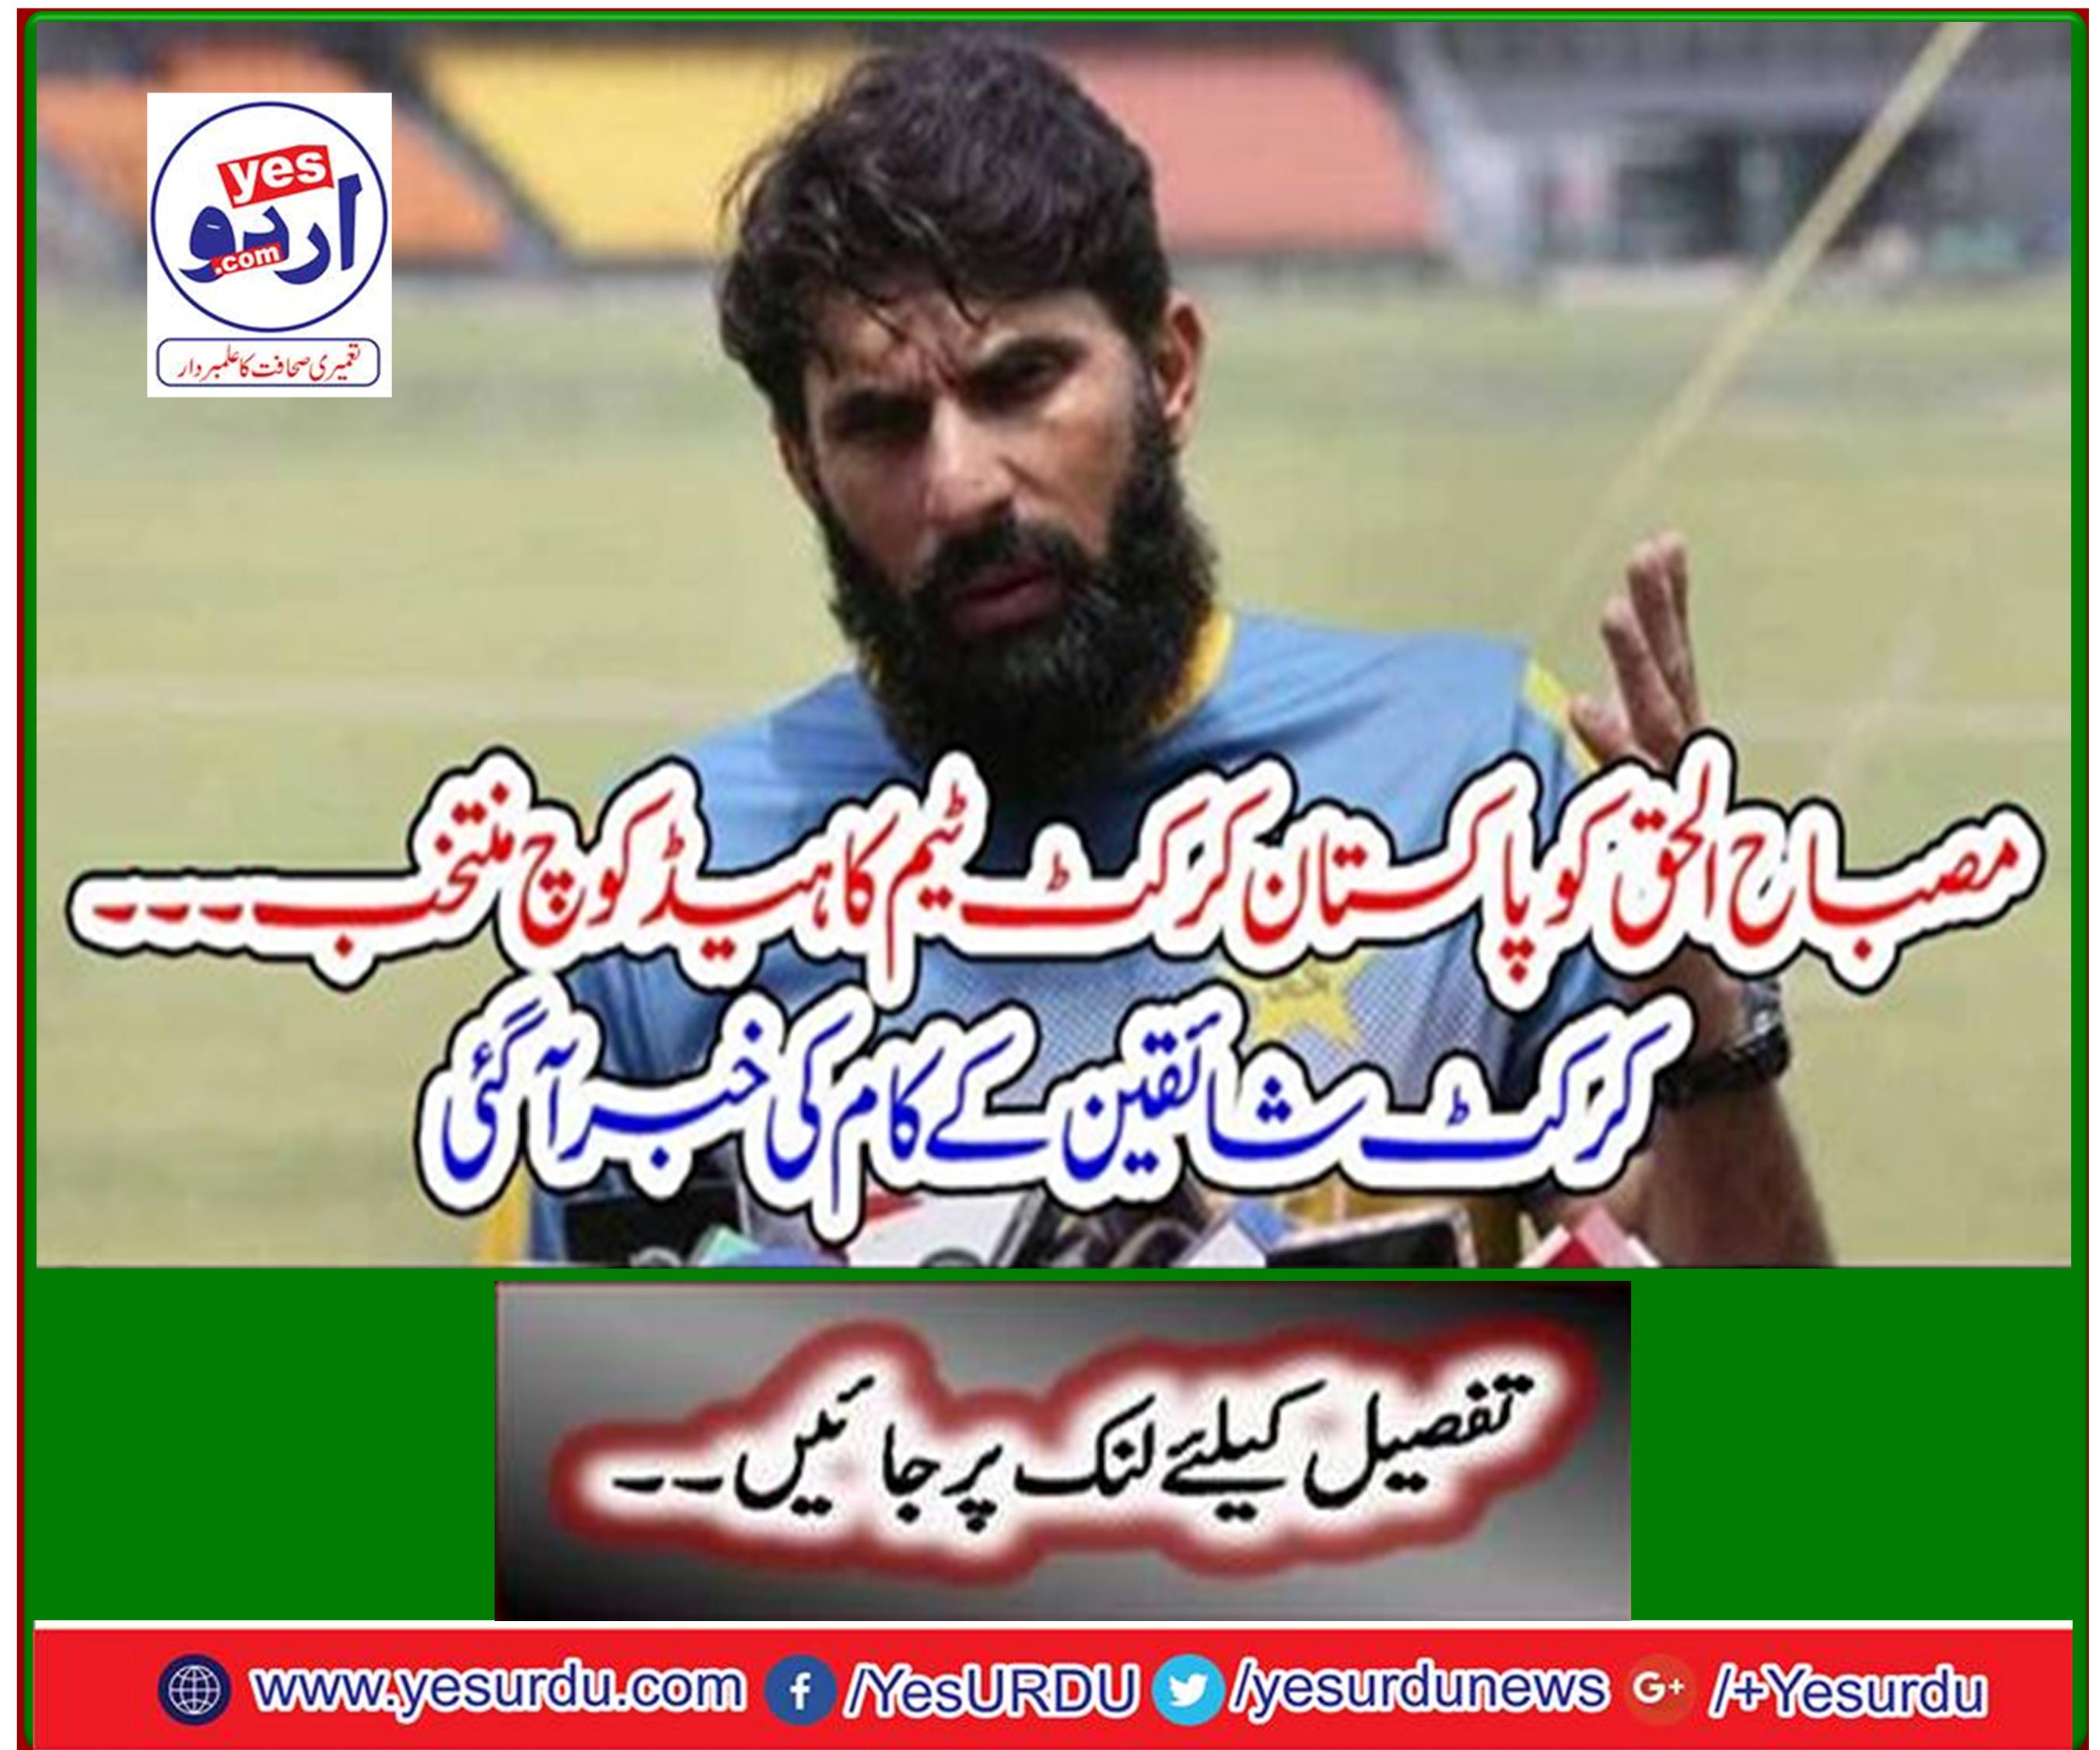 Misbah-ul-Haq elected head coach of Pakistan Cricket Team News of the work of cricket fans has arrived